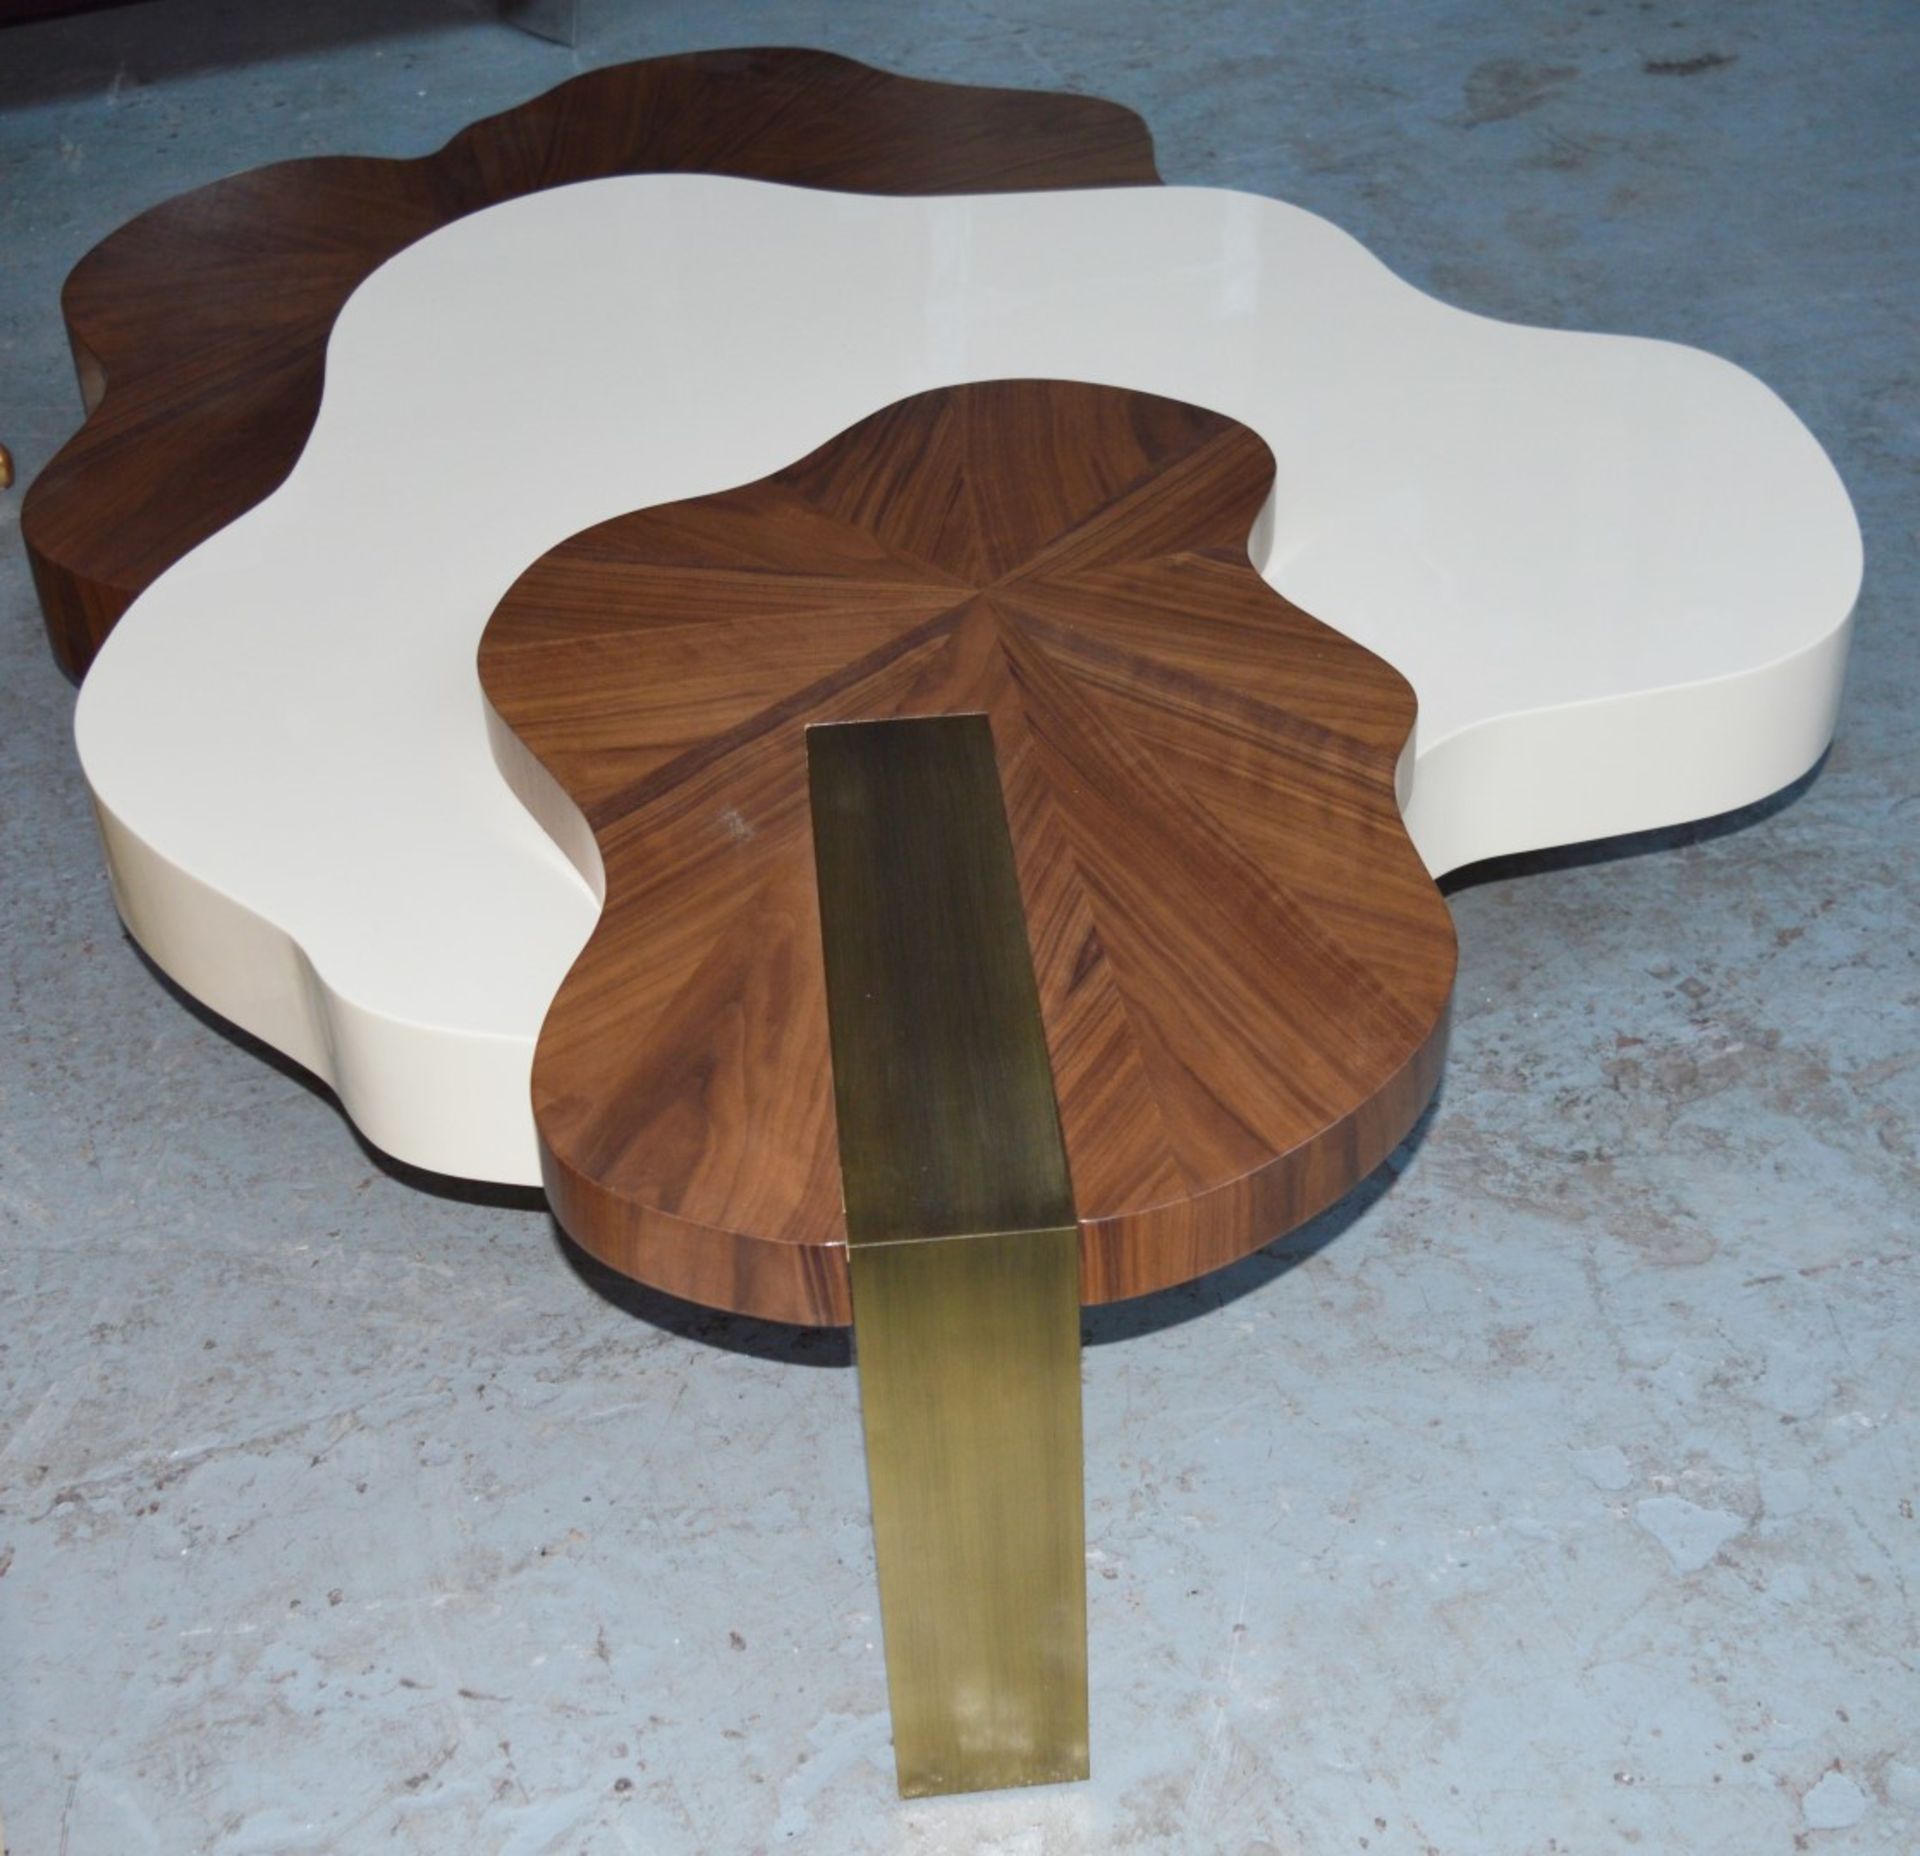 1 x Ginger & Jagger Nenhuphar Coffee Table - Urbanmint Design - Eye Catching Design - Walnut and - Image 13 of 15